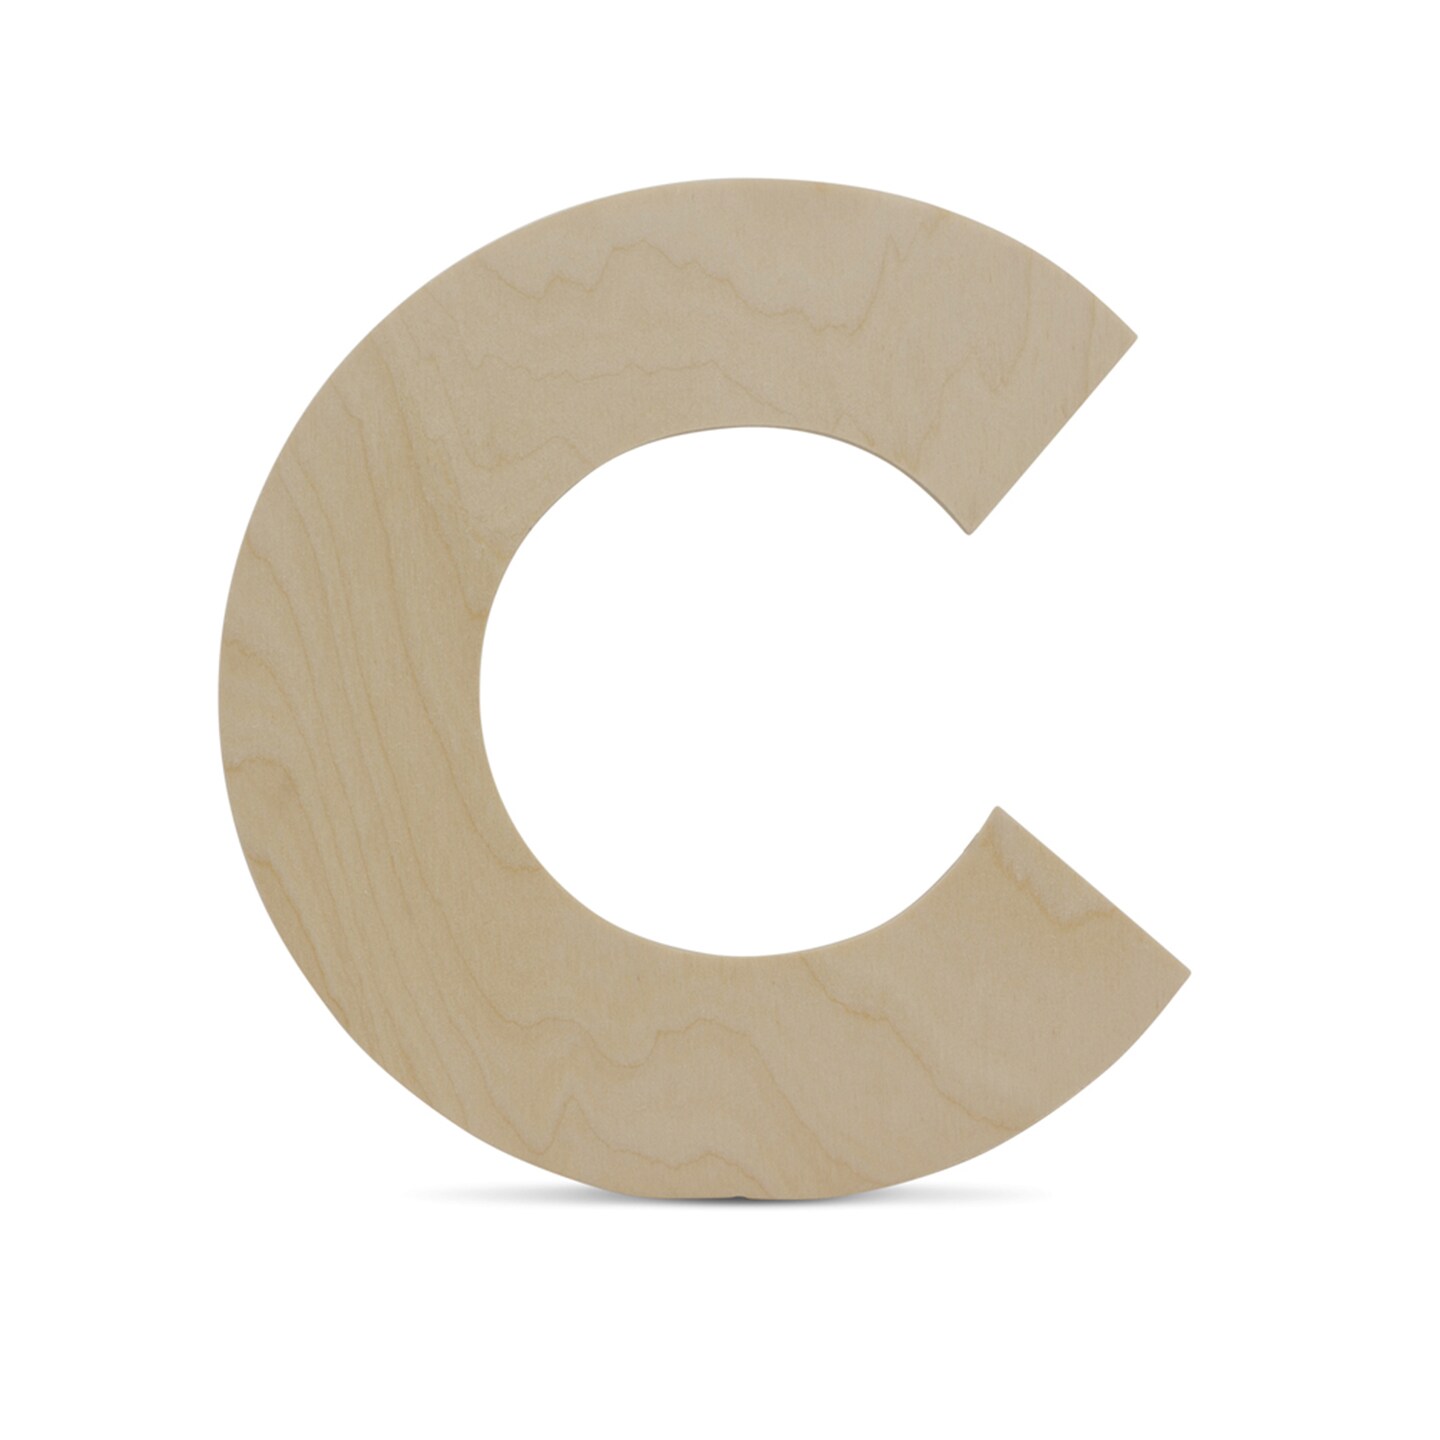 Wooden Letter C 12 inch or 8 inch, Unfinished Large Wood Letters for Crafts | Woodpeckers